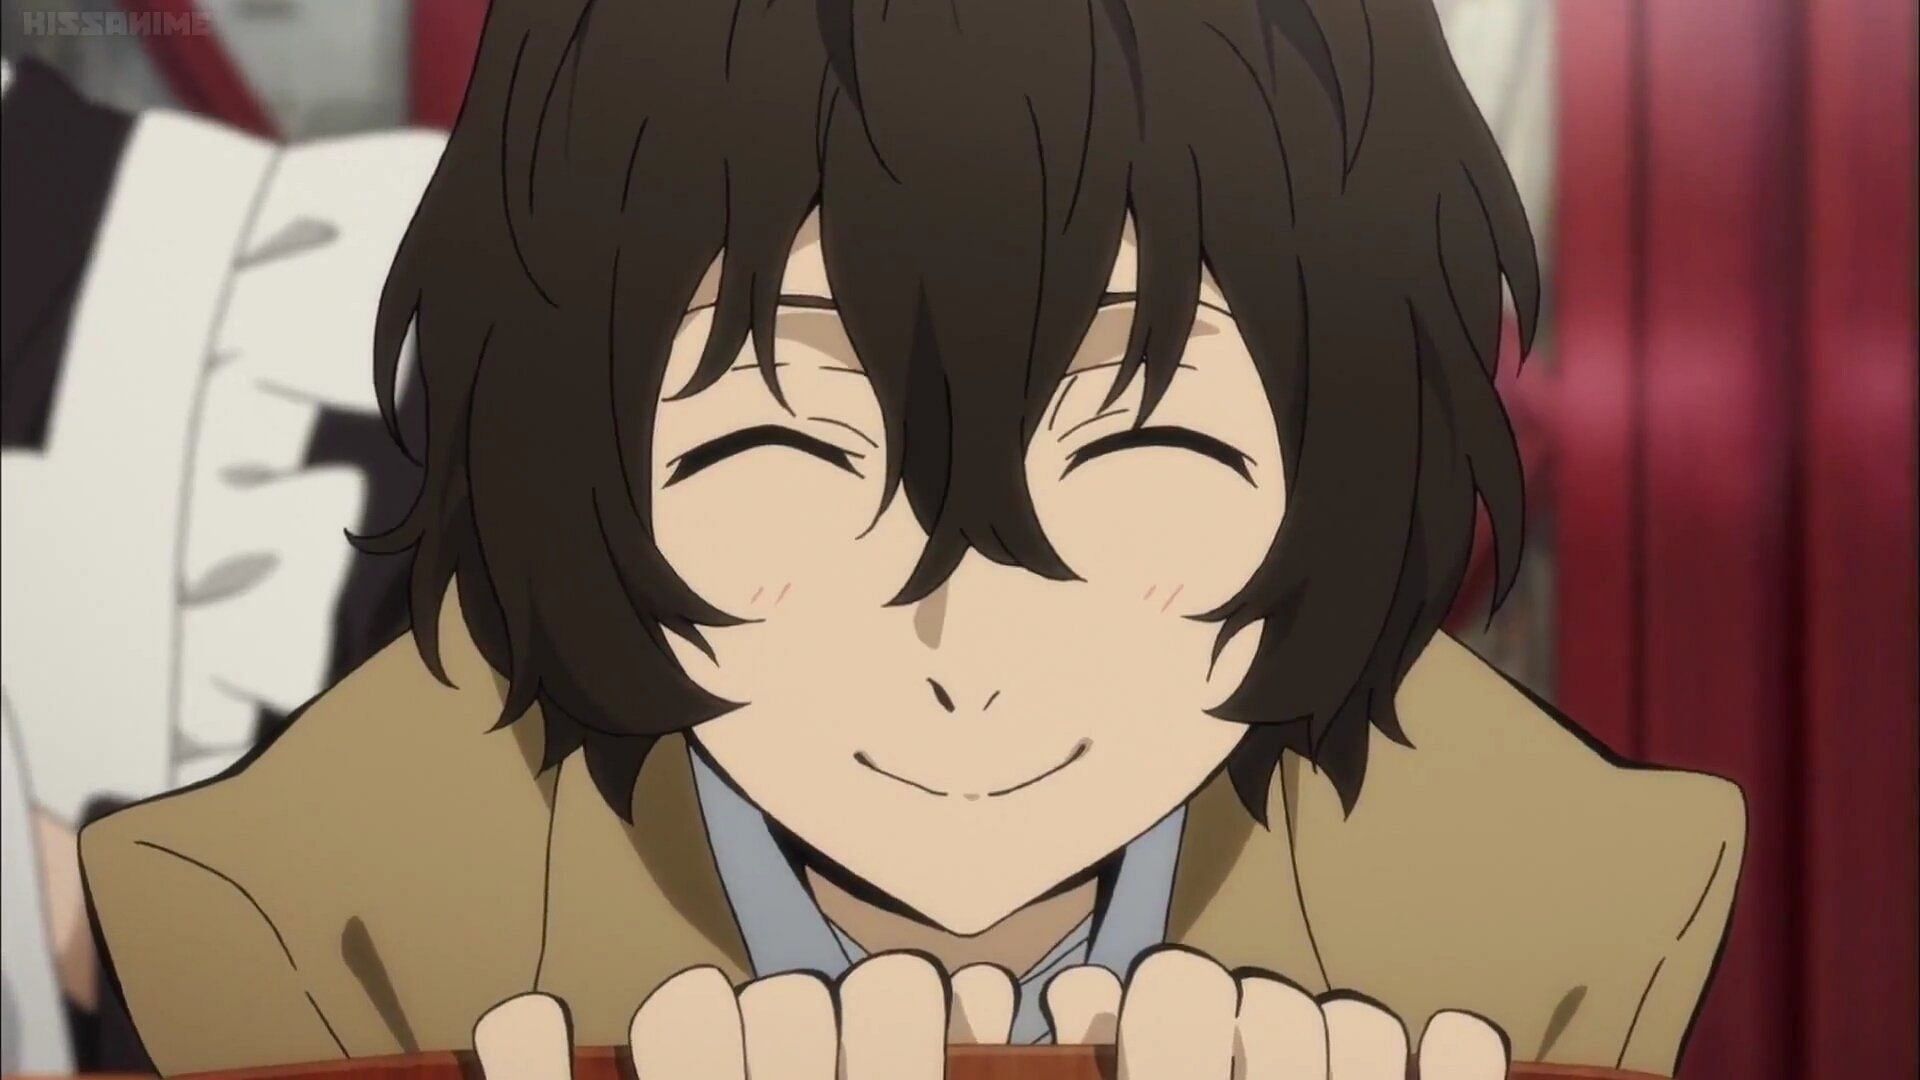 10 eccentric anime characters like Dazai from Bungo Stray Dogs